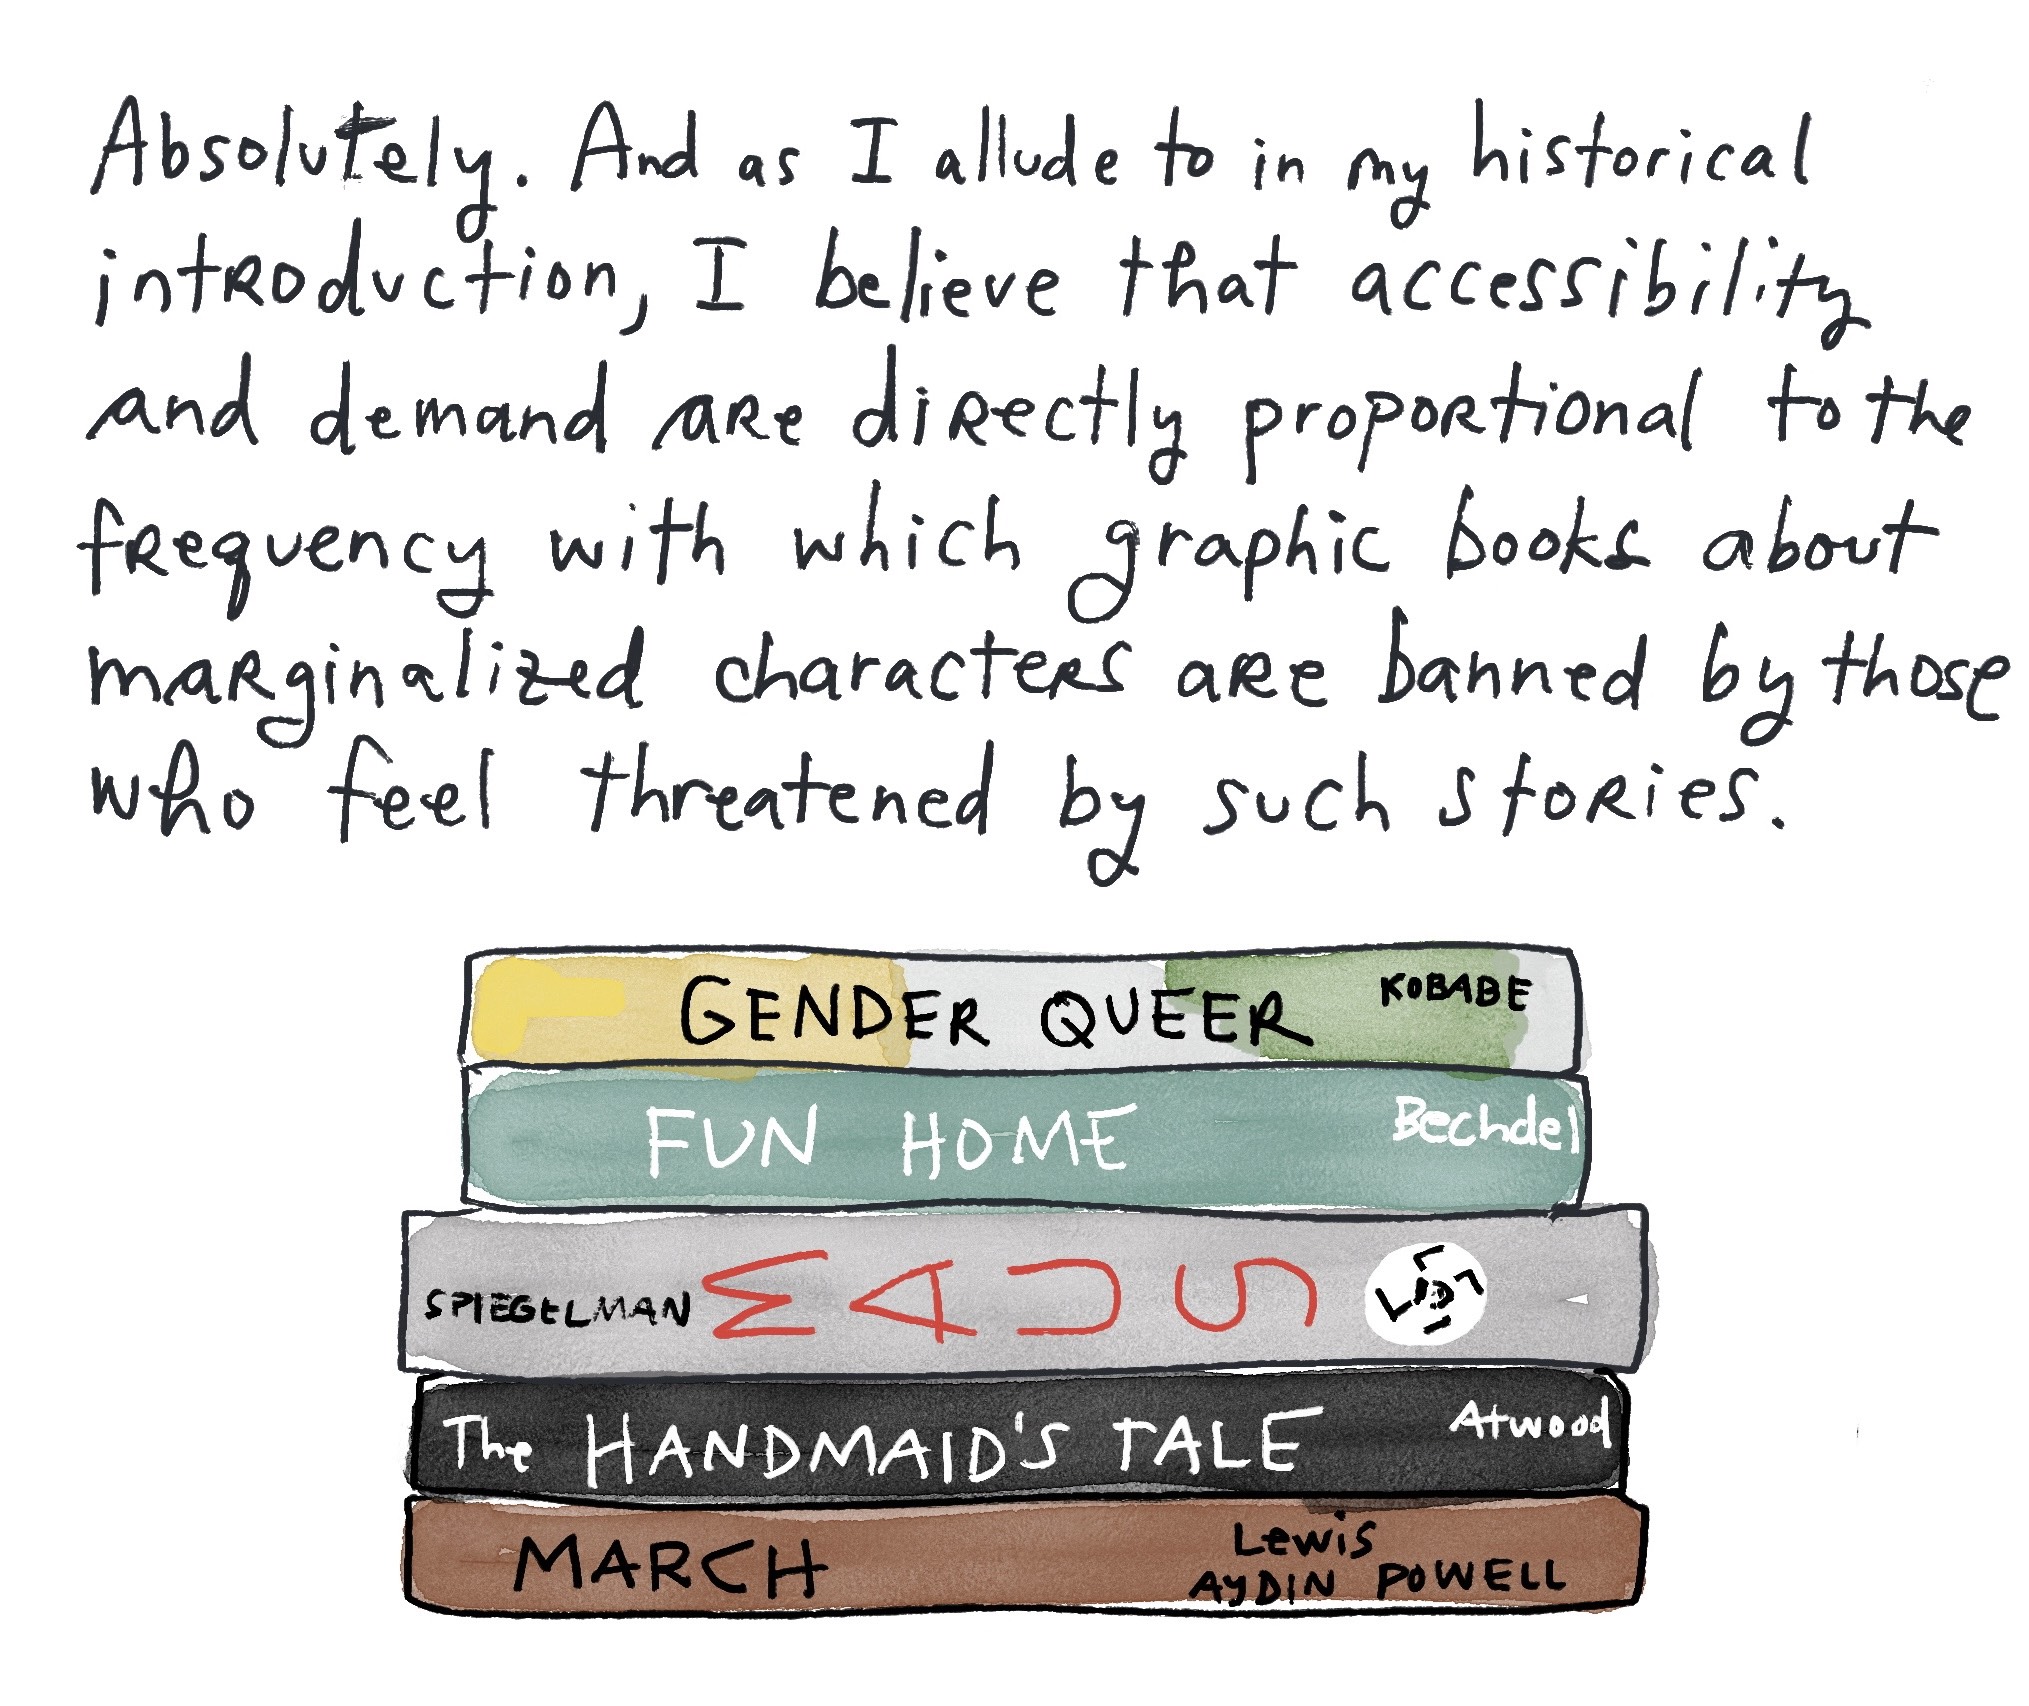 Image is a sketch of a stack of banned books with spines showing. Accompanying text: "Absolutely. And as I allude to in my historical introduction, I believe that accessibility and demand are directly proportional to the frequency with which graphic books about marginalized characters are banned by those who feel threatened by such stories."